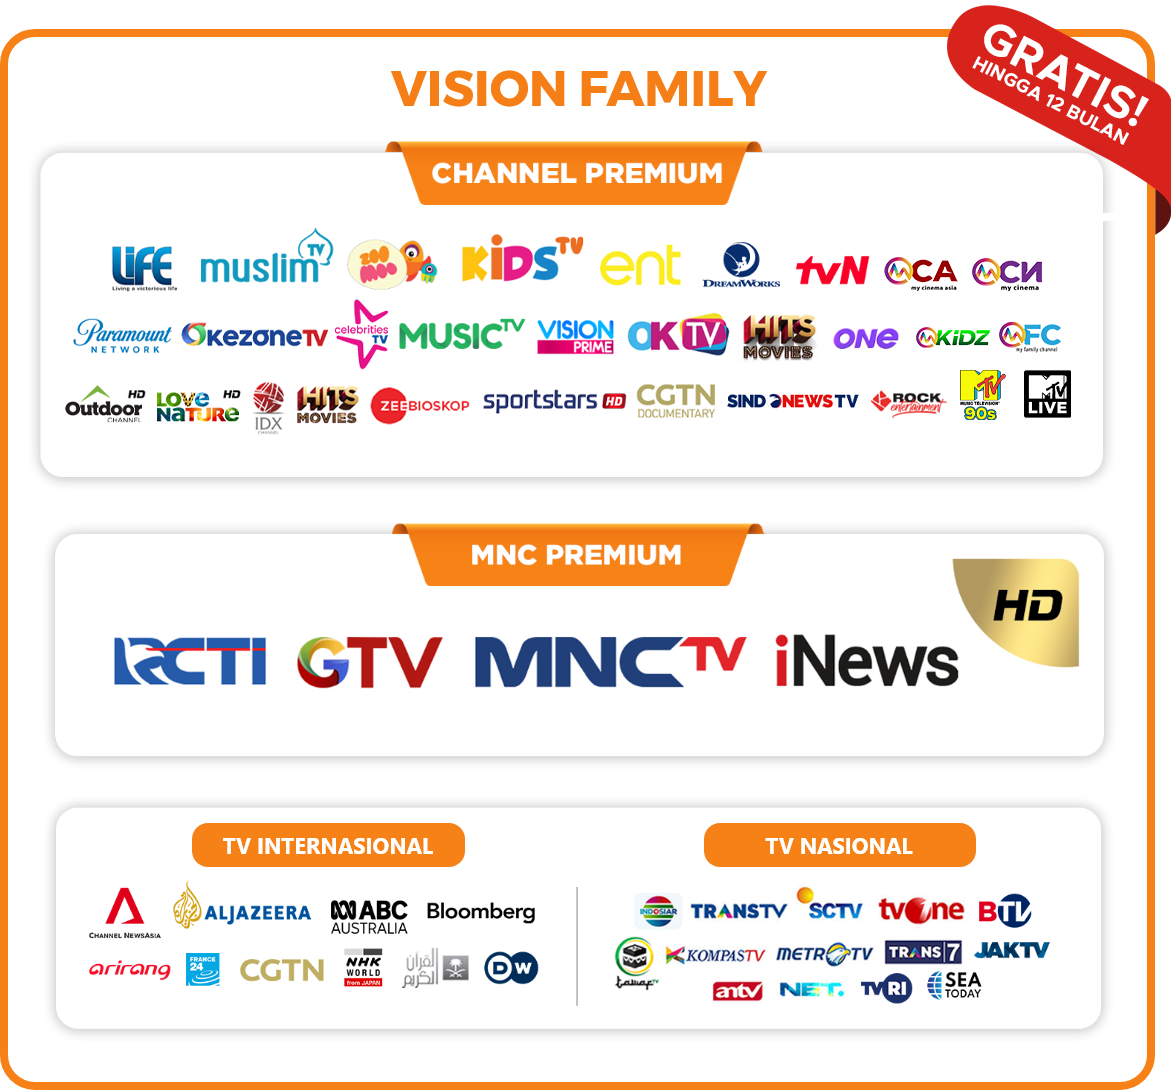 Channel Vision Family